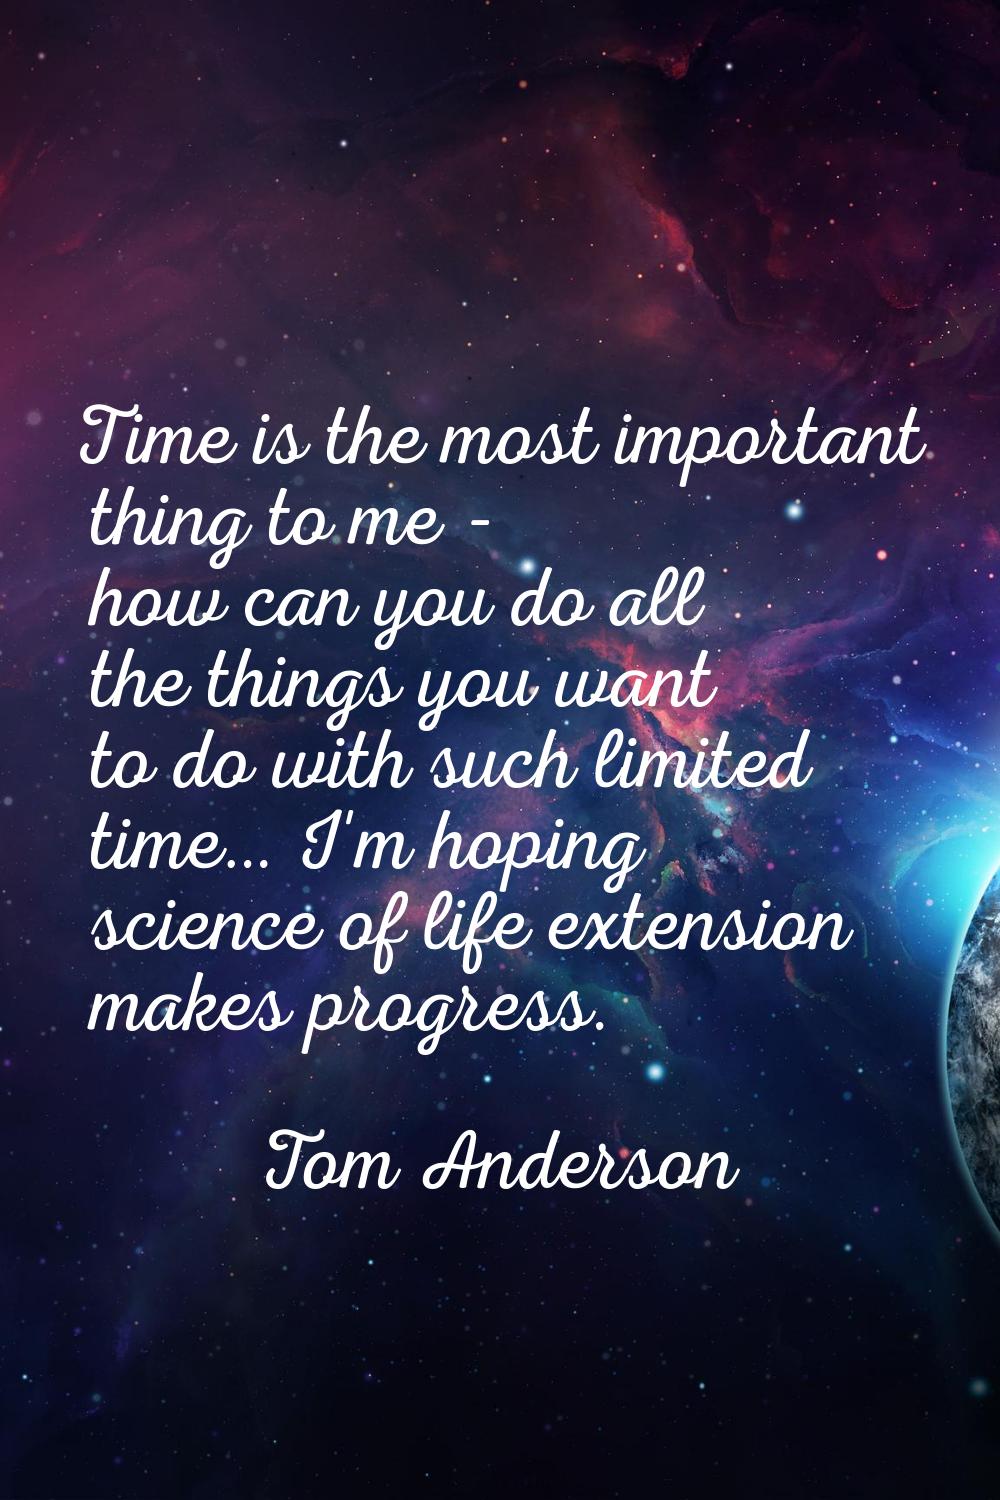 Time is the most important thing to me - how can you do all the things you want to do with such lim